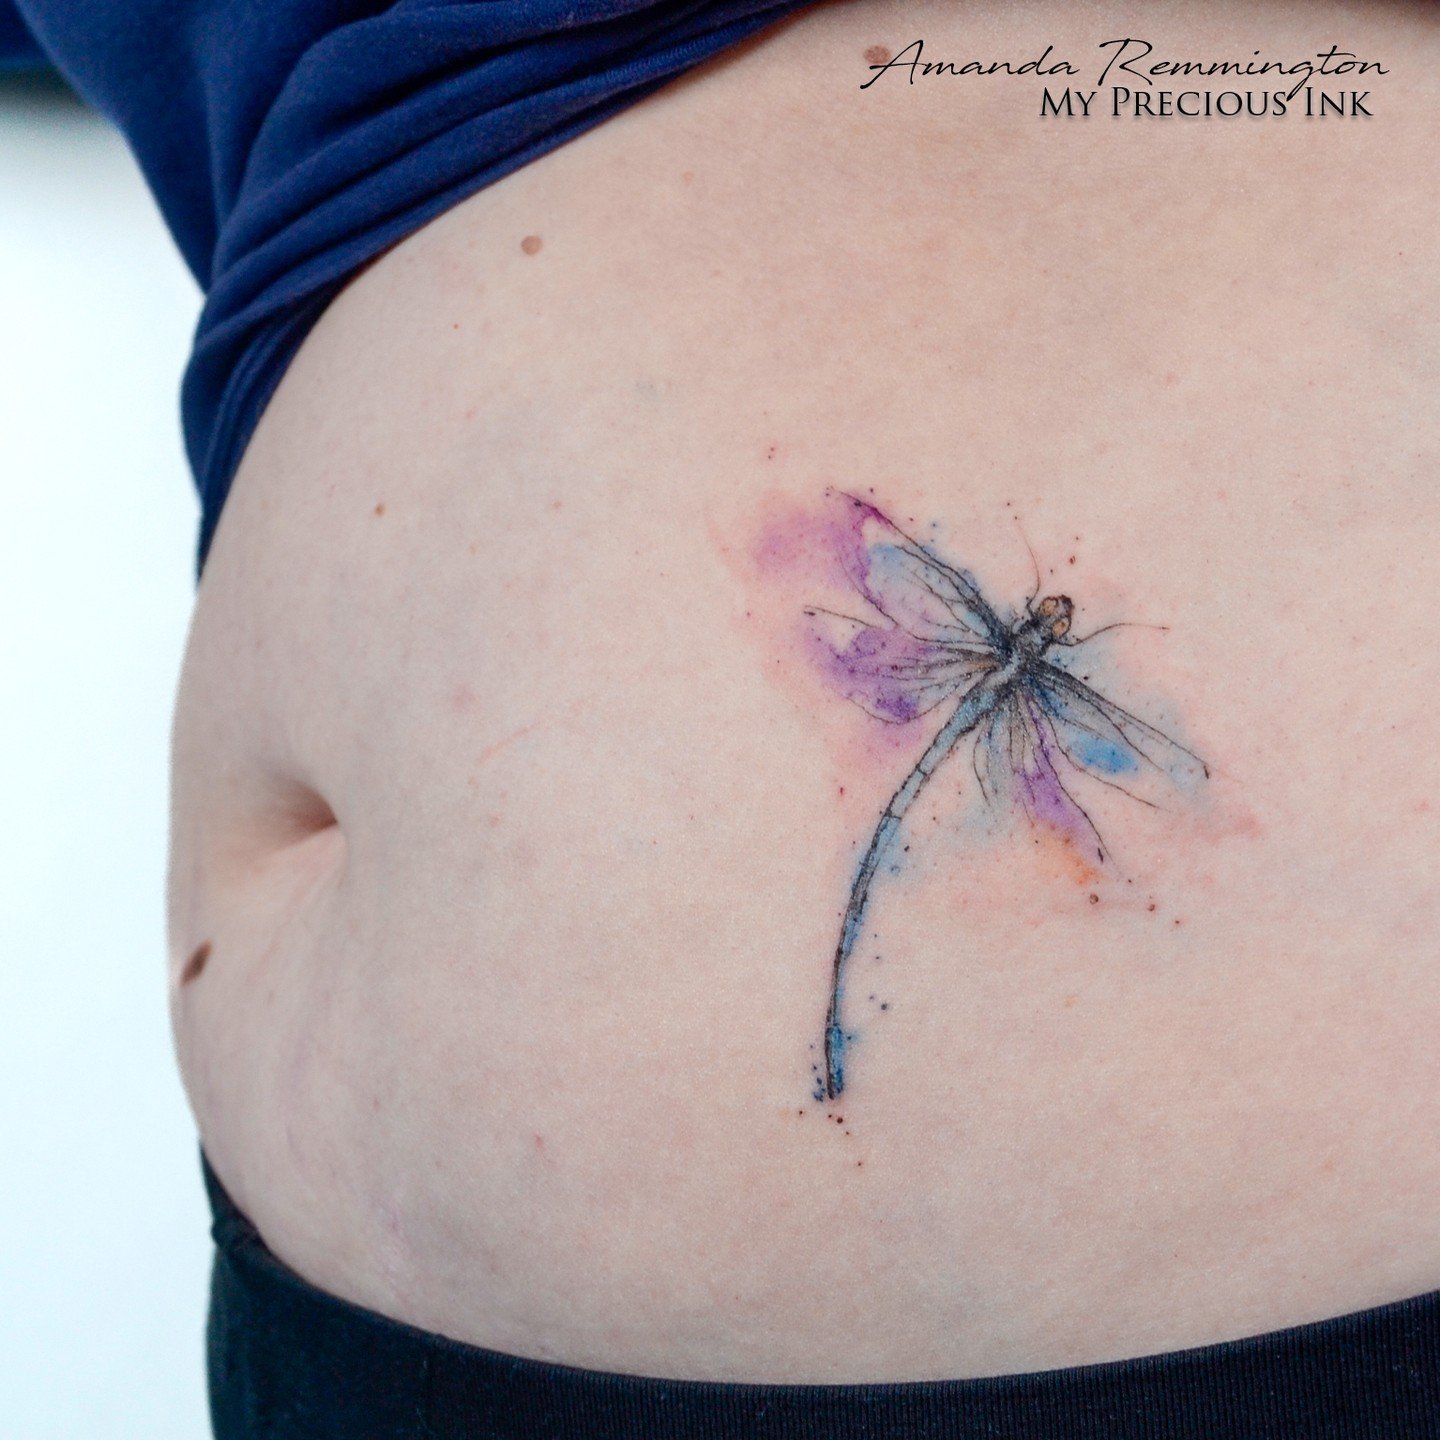 I think dragonflies are fantastic and always fun to make and they are all unique! #Tattoo #watercolortattoo #watercolourtattoo #watercolor #thebesttattooartists #tattoodo 
 #tattooart #tattooflower #tattooidea #thebestbelgiumtattooartists #tattoolove